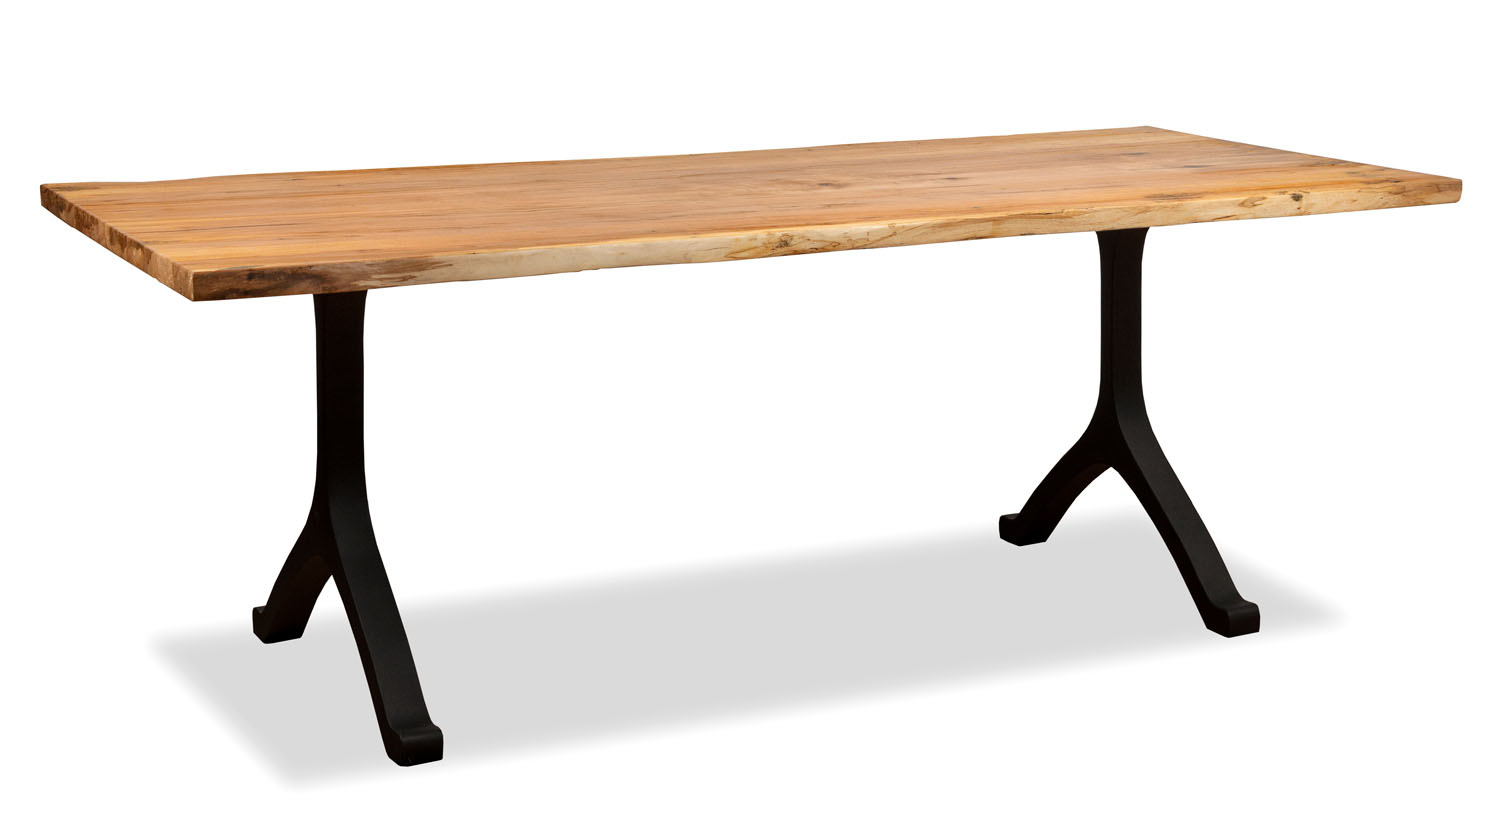 https://www.circlefurniture.com/userfiles/images/Products/lighthouse/spalted-maple-live-edge-table/Spaulted-Live-Edge-Dining-Table-45-main.jpg